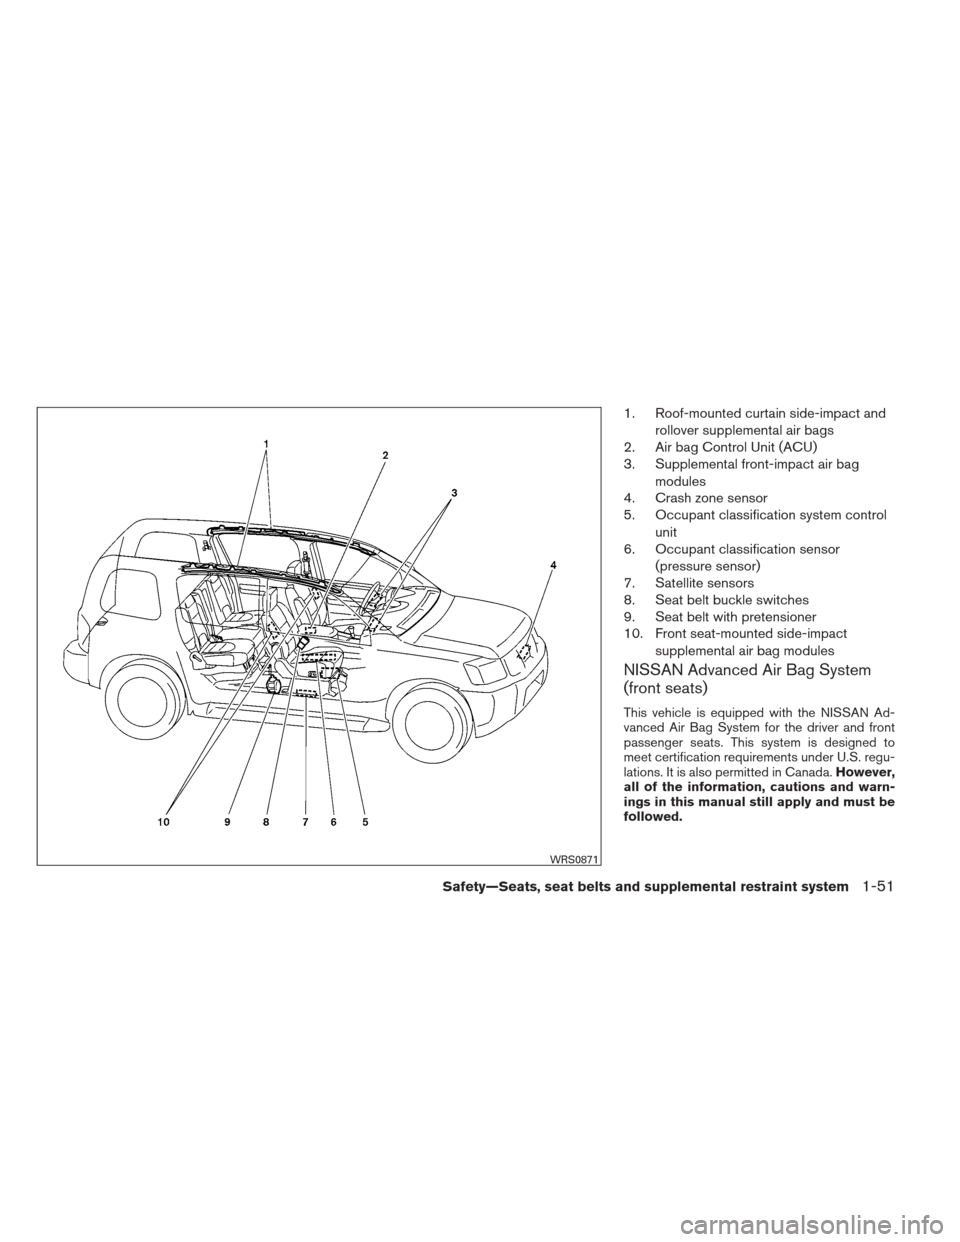 NISSAN XTERRA 2012 N50 / 2.G Owners Manual 1. Roof-mounted curtain side-impact androllover supplemental air bags
2. Air bag Control Unit (ACU)
3. Supplemental front-impact air bag
modules
4. Crash zone sensor
5. Occupant classification system 